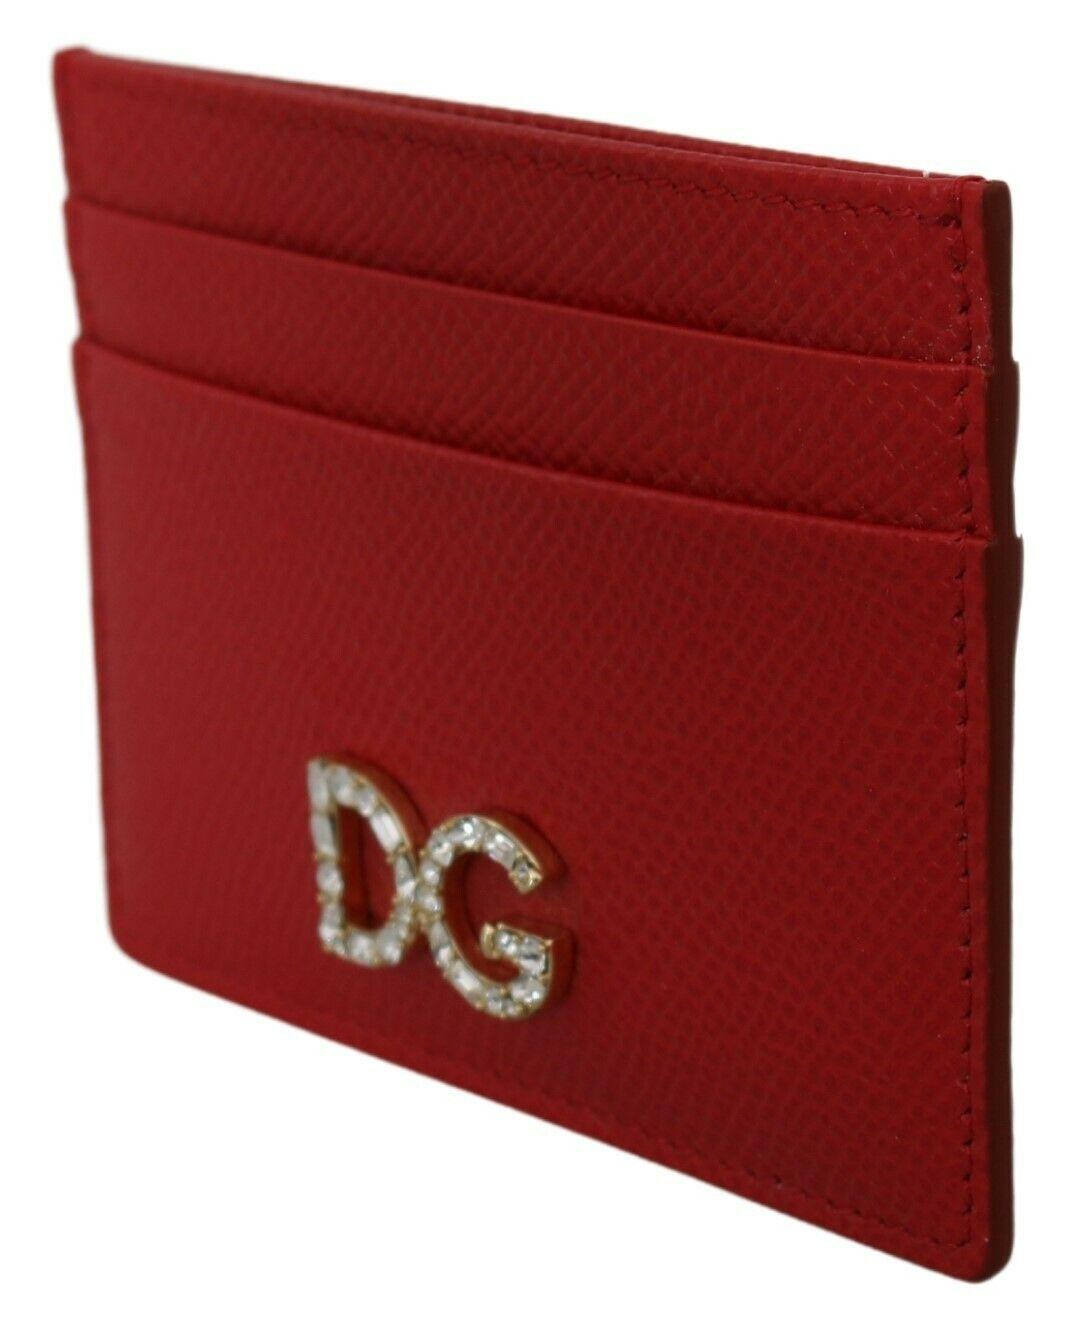 Gorgeous brand new with tags, 100% Authentic Dolce & Gabbana wallet.



Model: Cardholder wallet
Material: 100% Leather
Color: Red with clear crystals
Cardholder slots
Logo engraved metal hardware
Made in Italy

Measurements: 10cm x 7cm x